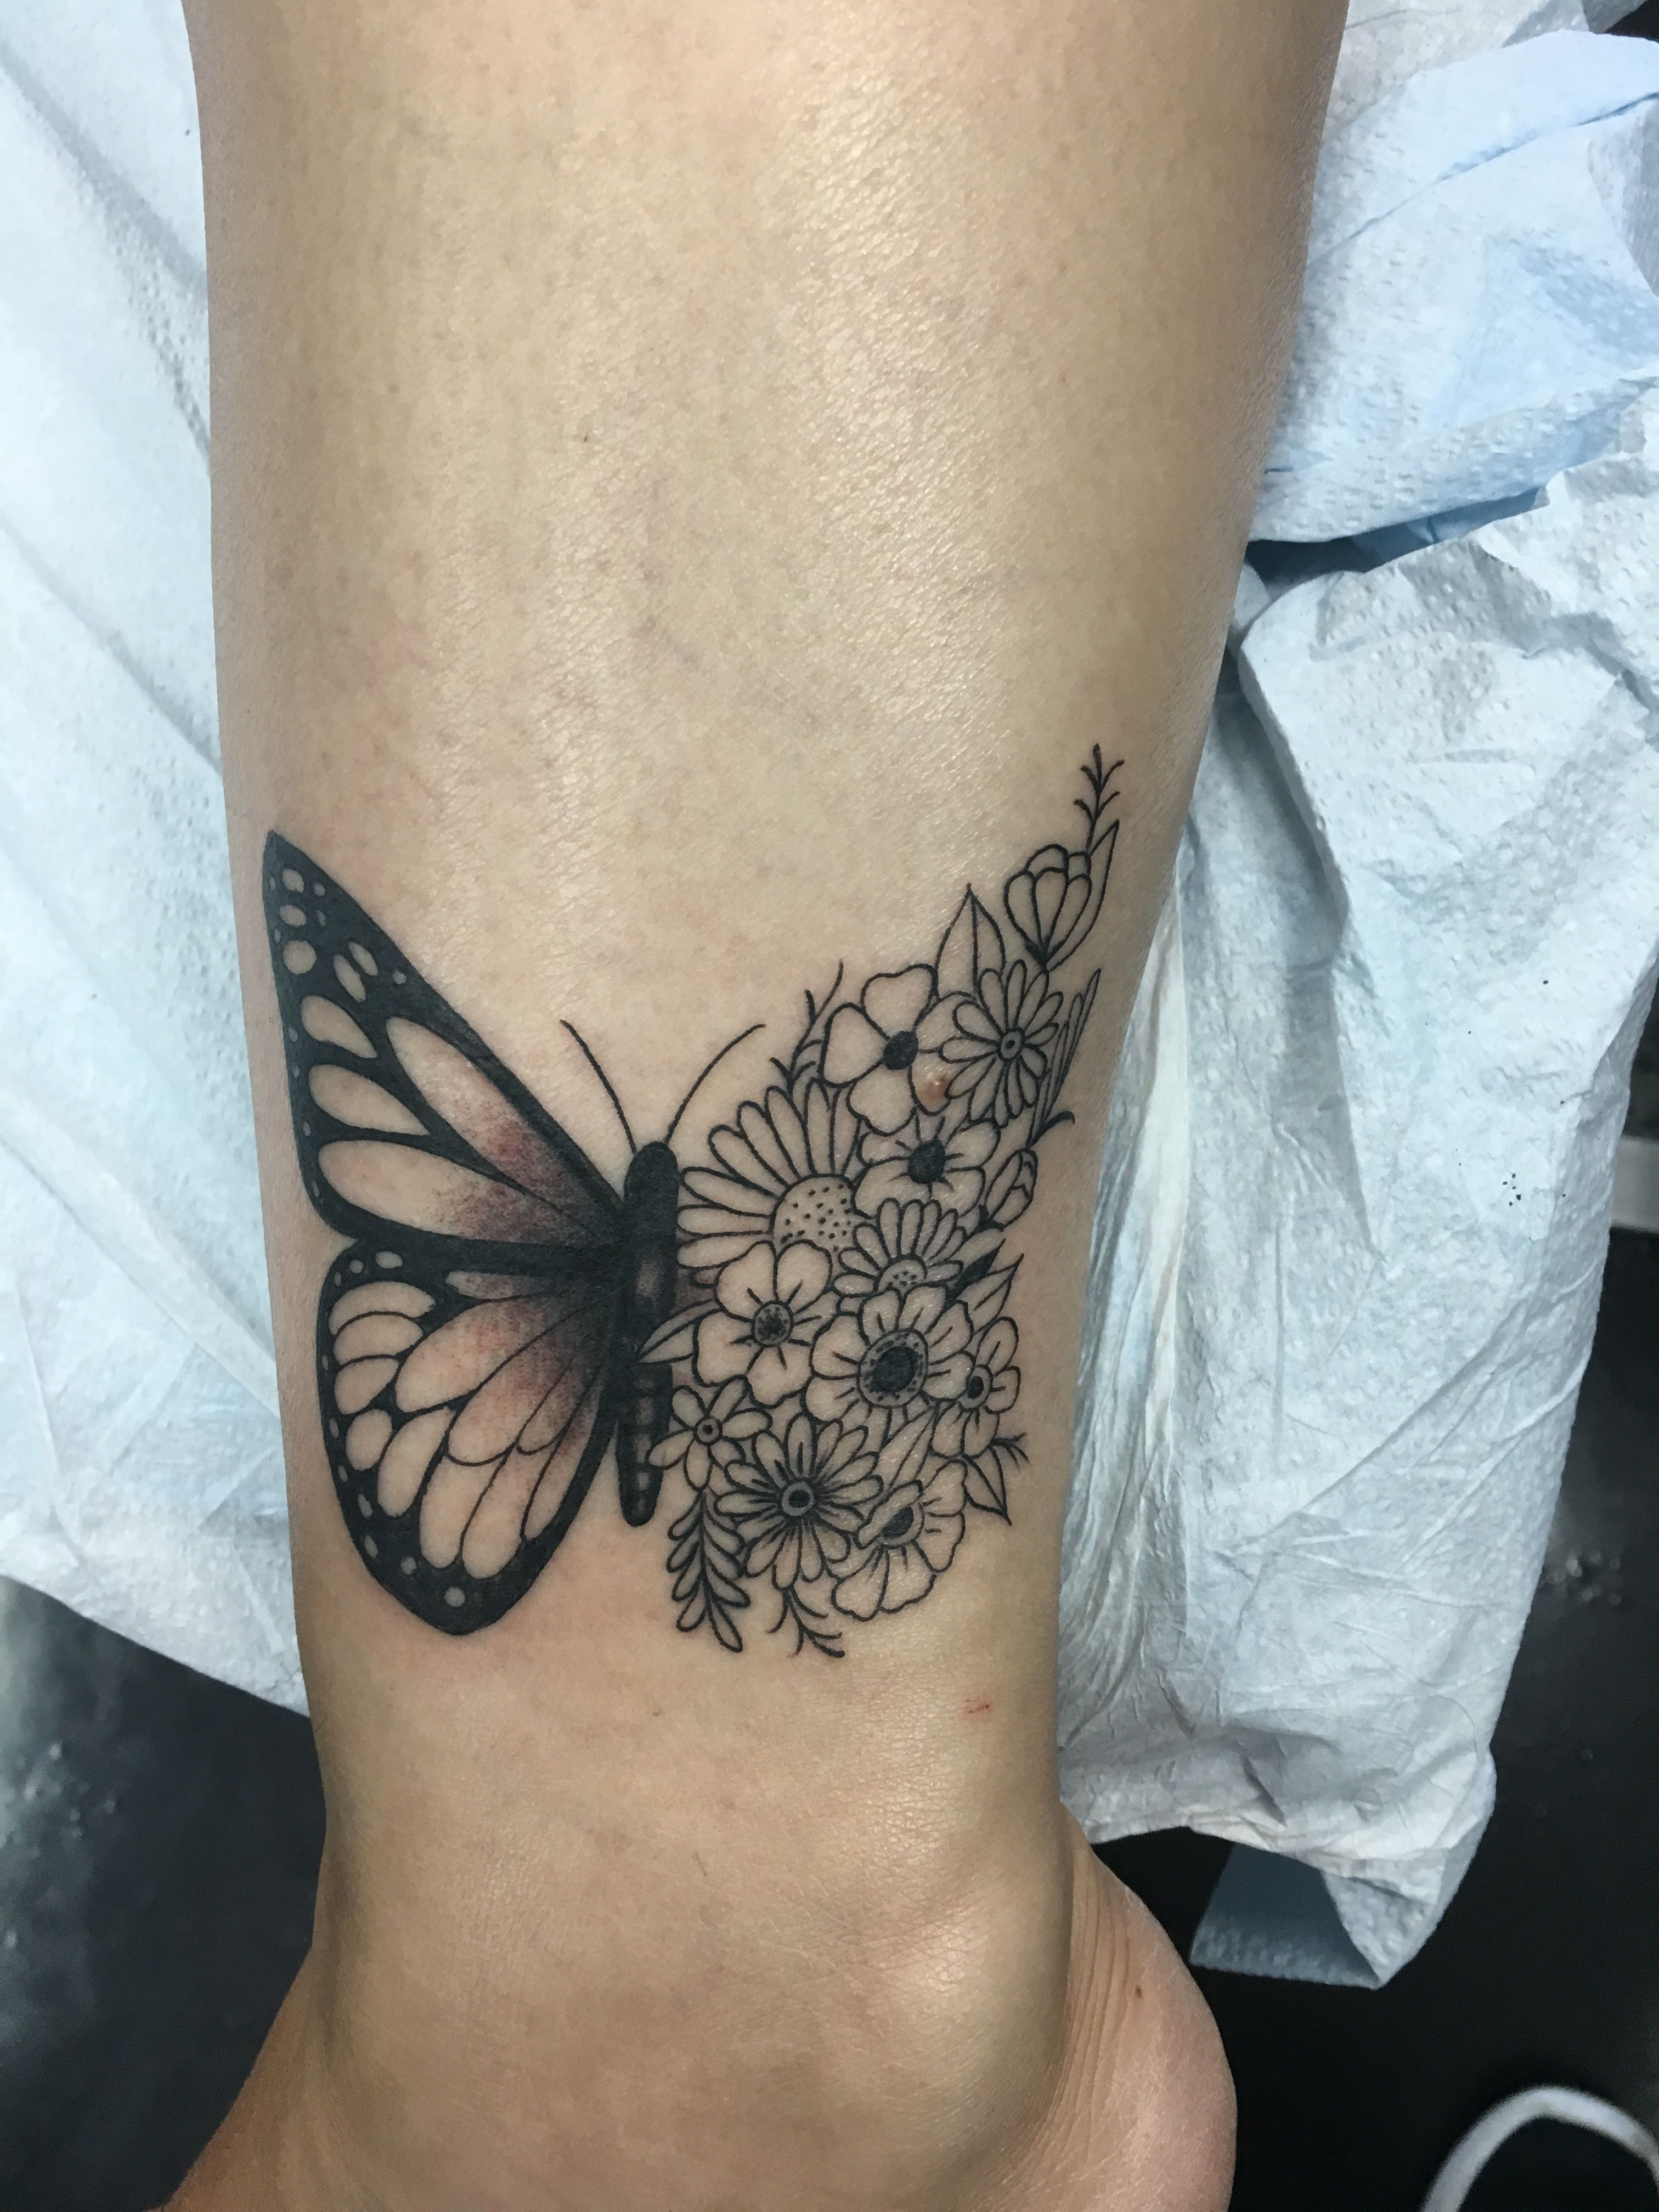 Love My New Butterfly Flower Tattoolooks Perfect On My Ankle in sizing 3024 X 4032